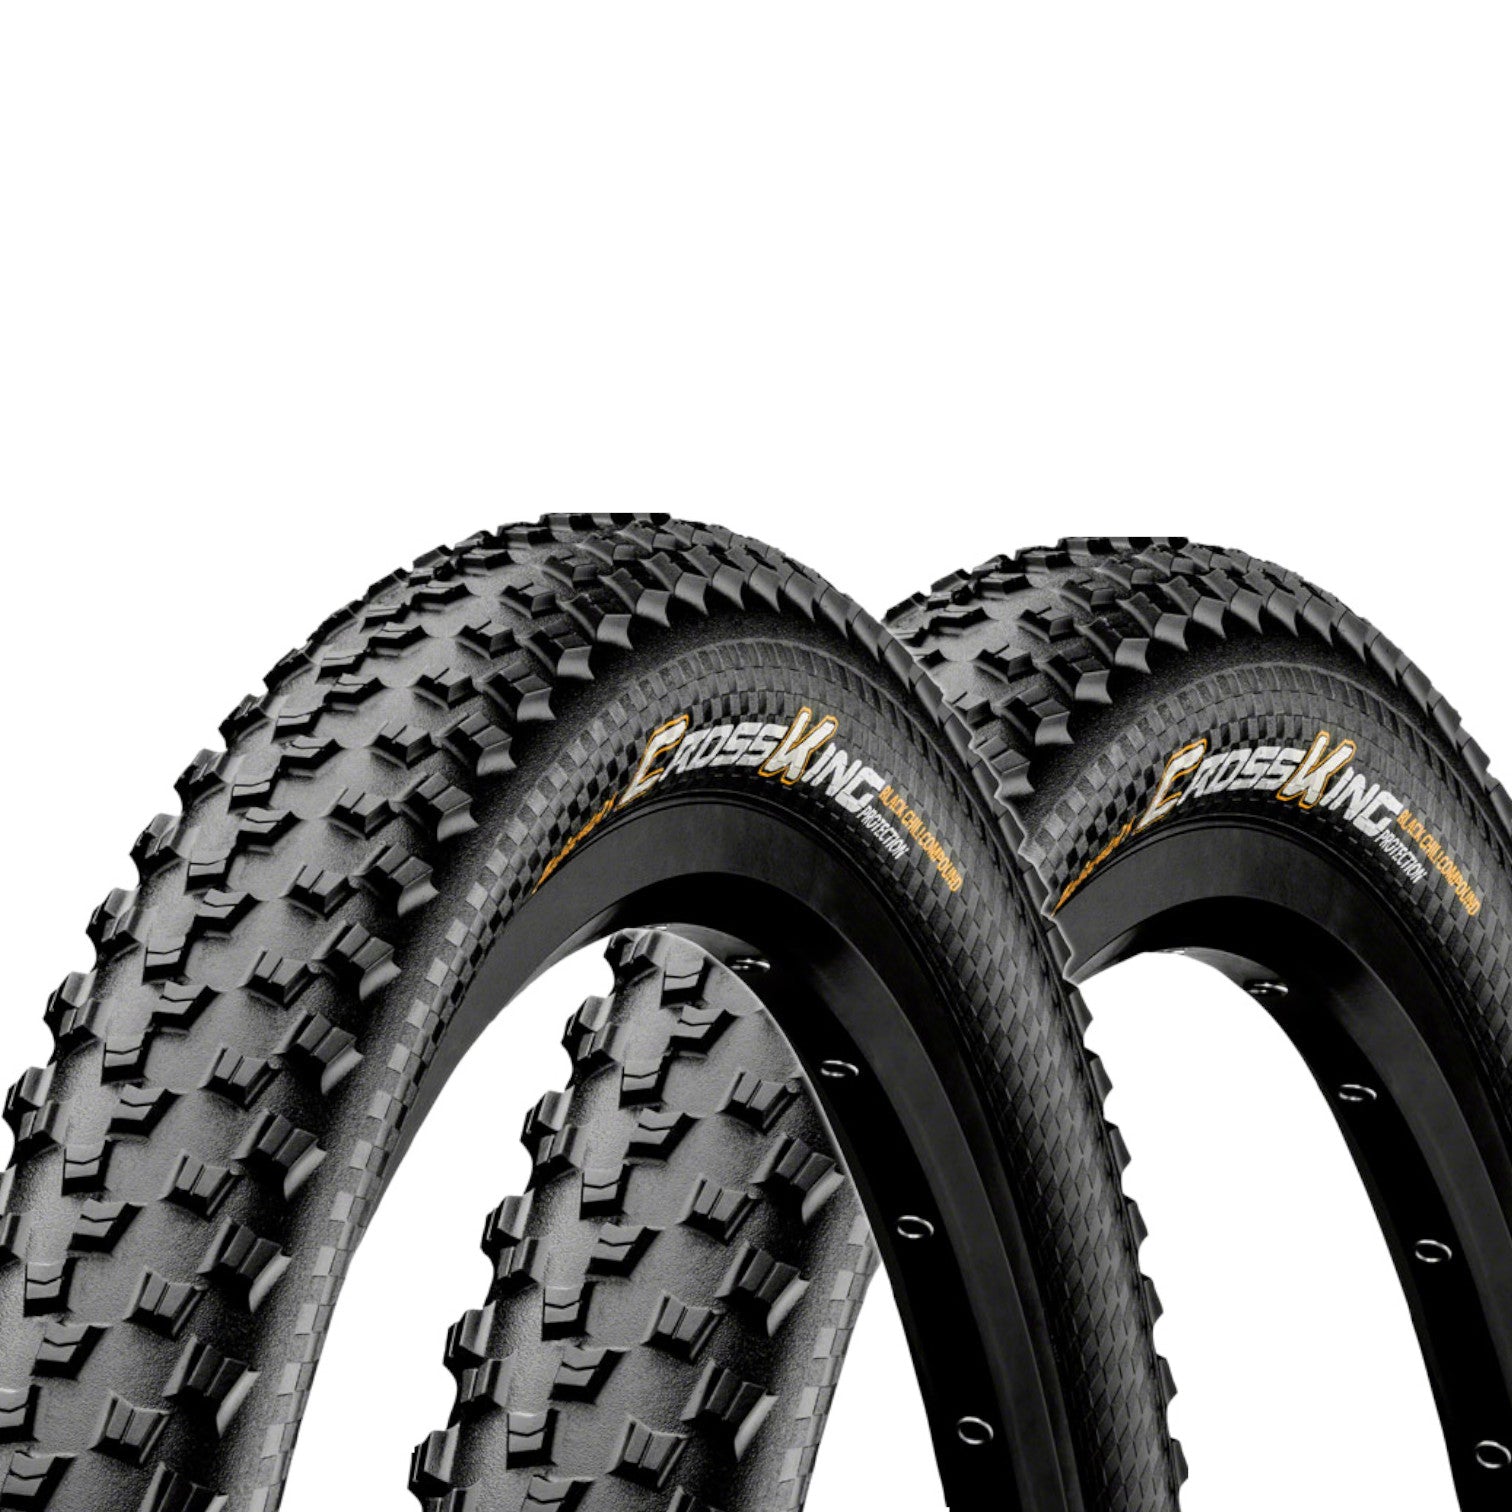 Continental Cross King 29-inch ProTection BlackChili Tubeless Tire - The Bikesmiths